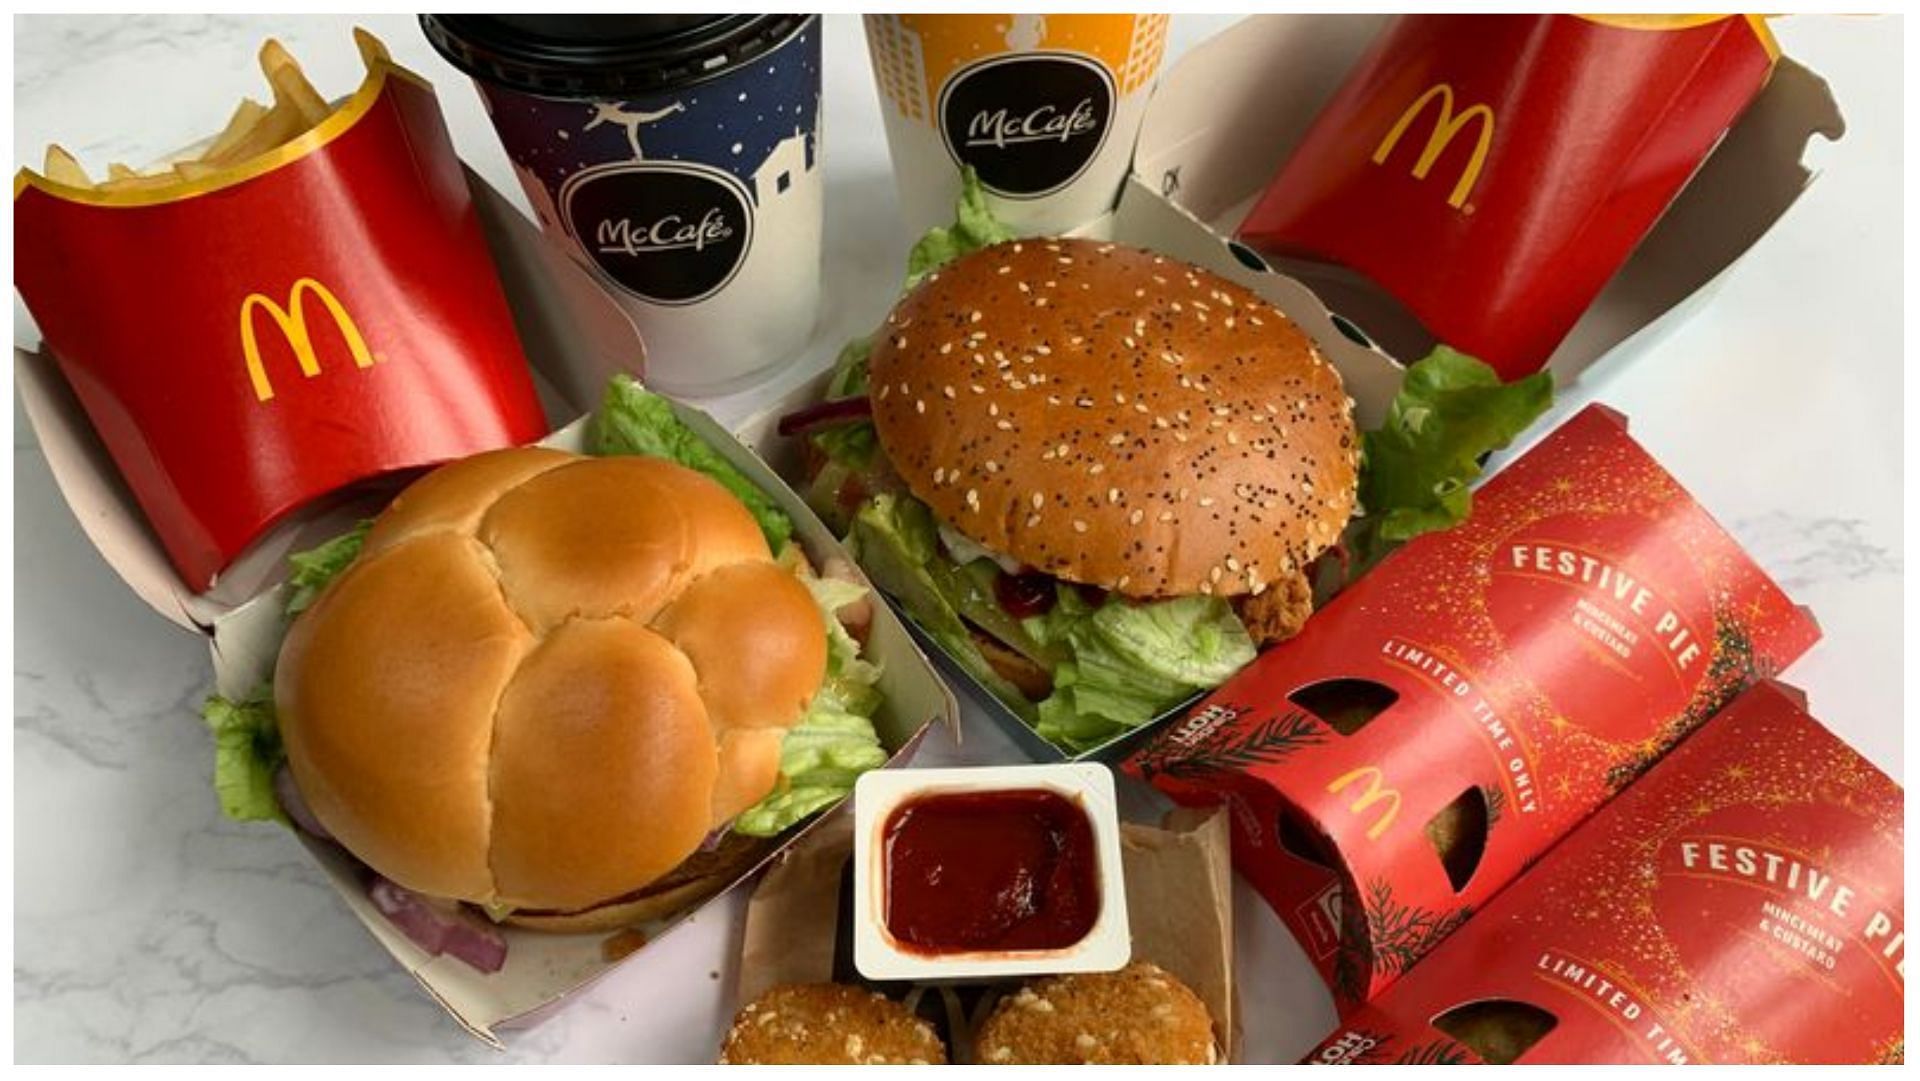 McDonald’s UK Festive Menu items, prices, and other details explored